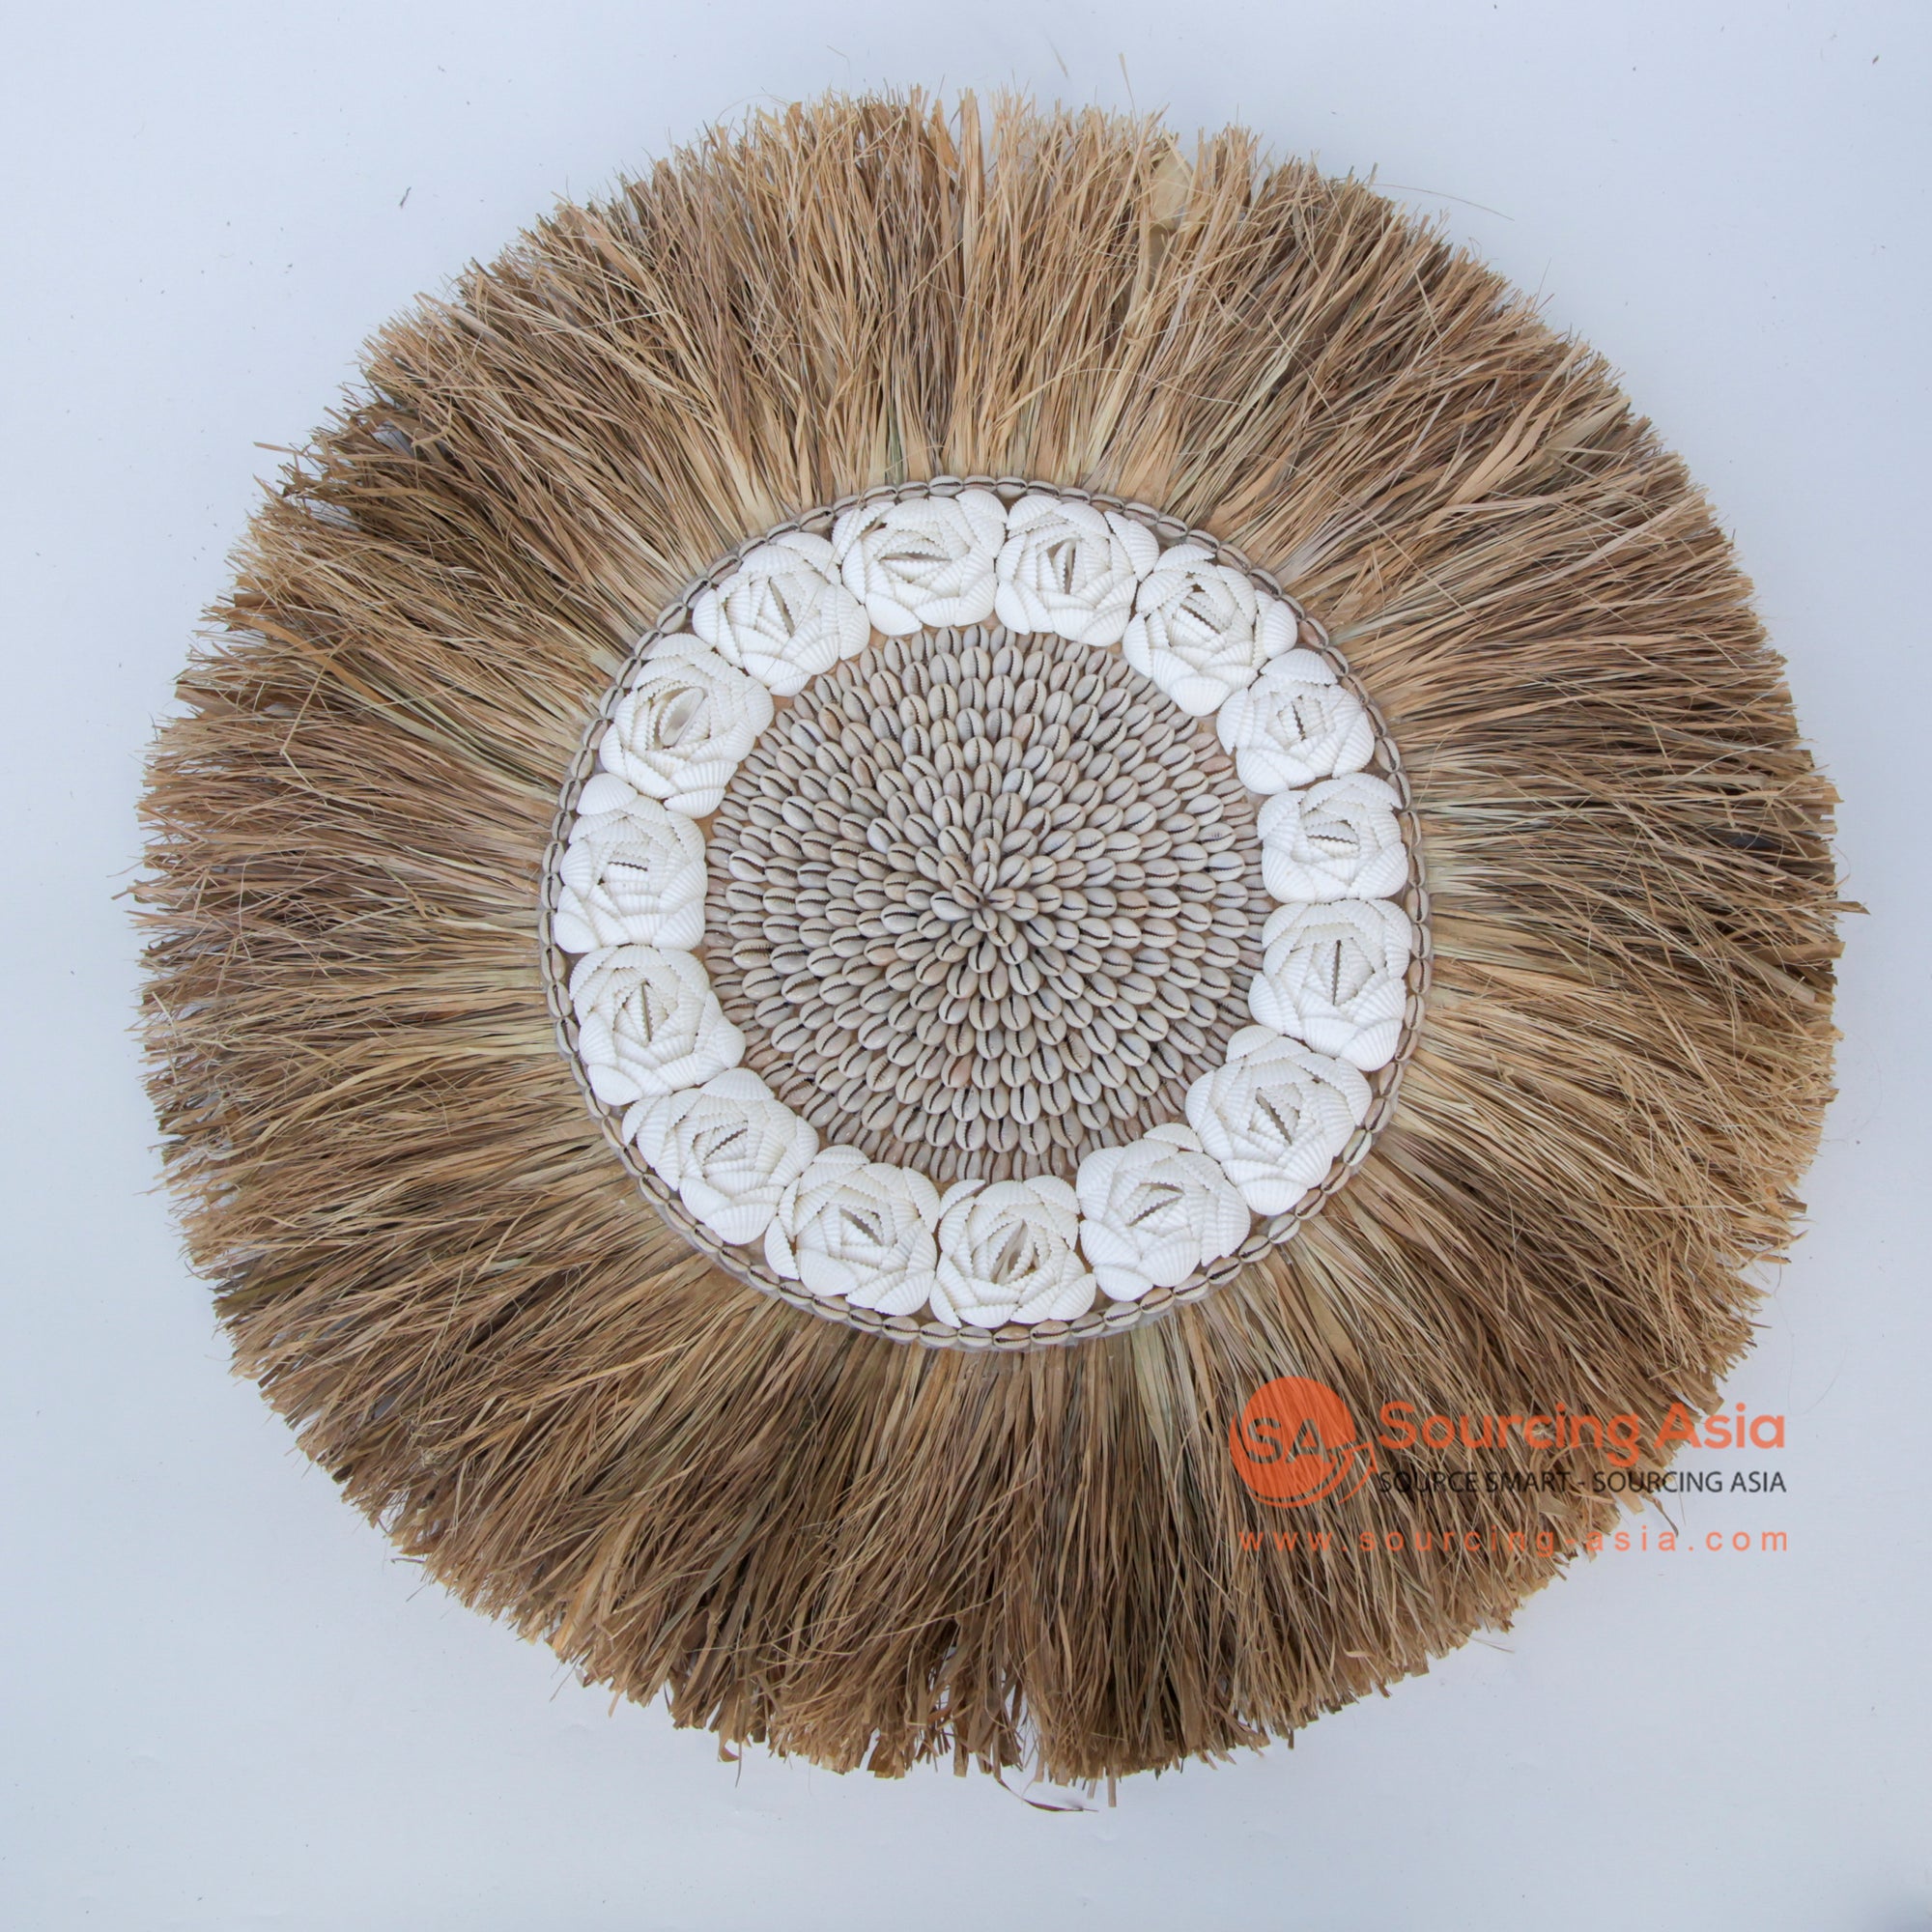 DHL067 NATURAL RAFFIA AND SHELL ROUND WALL DECORATION